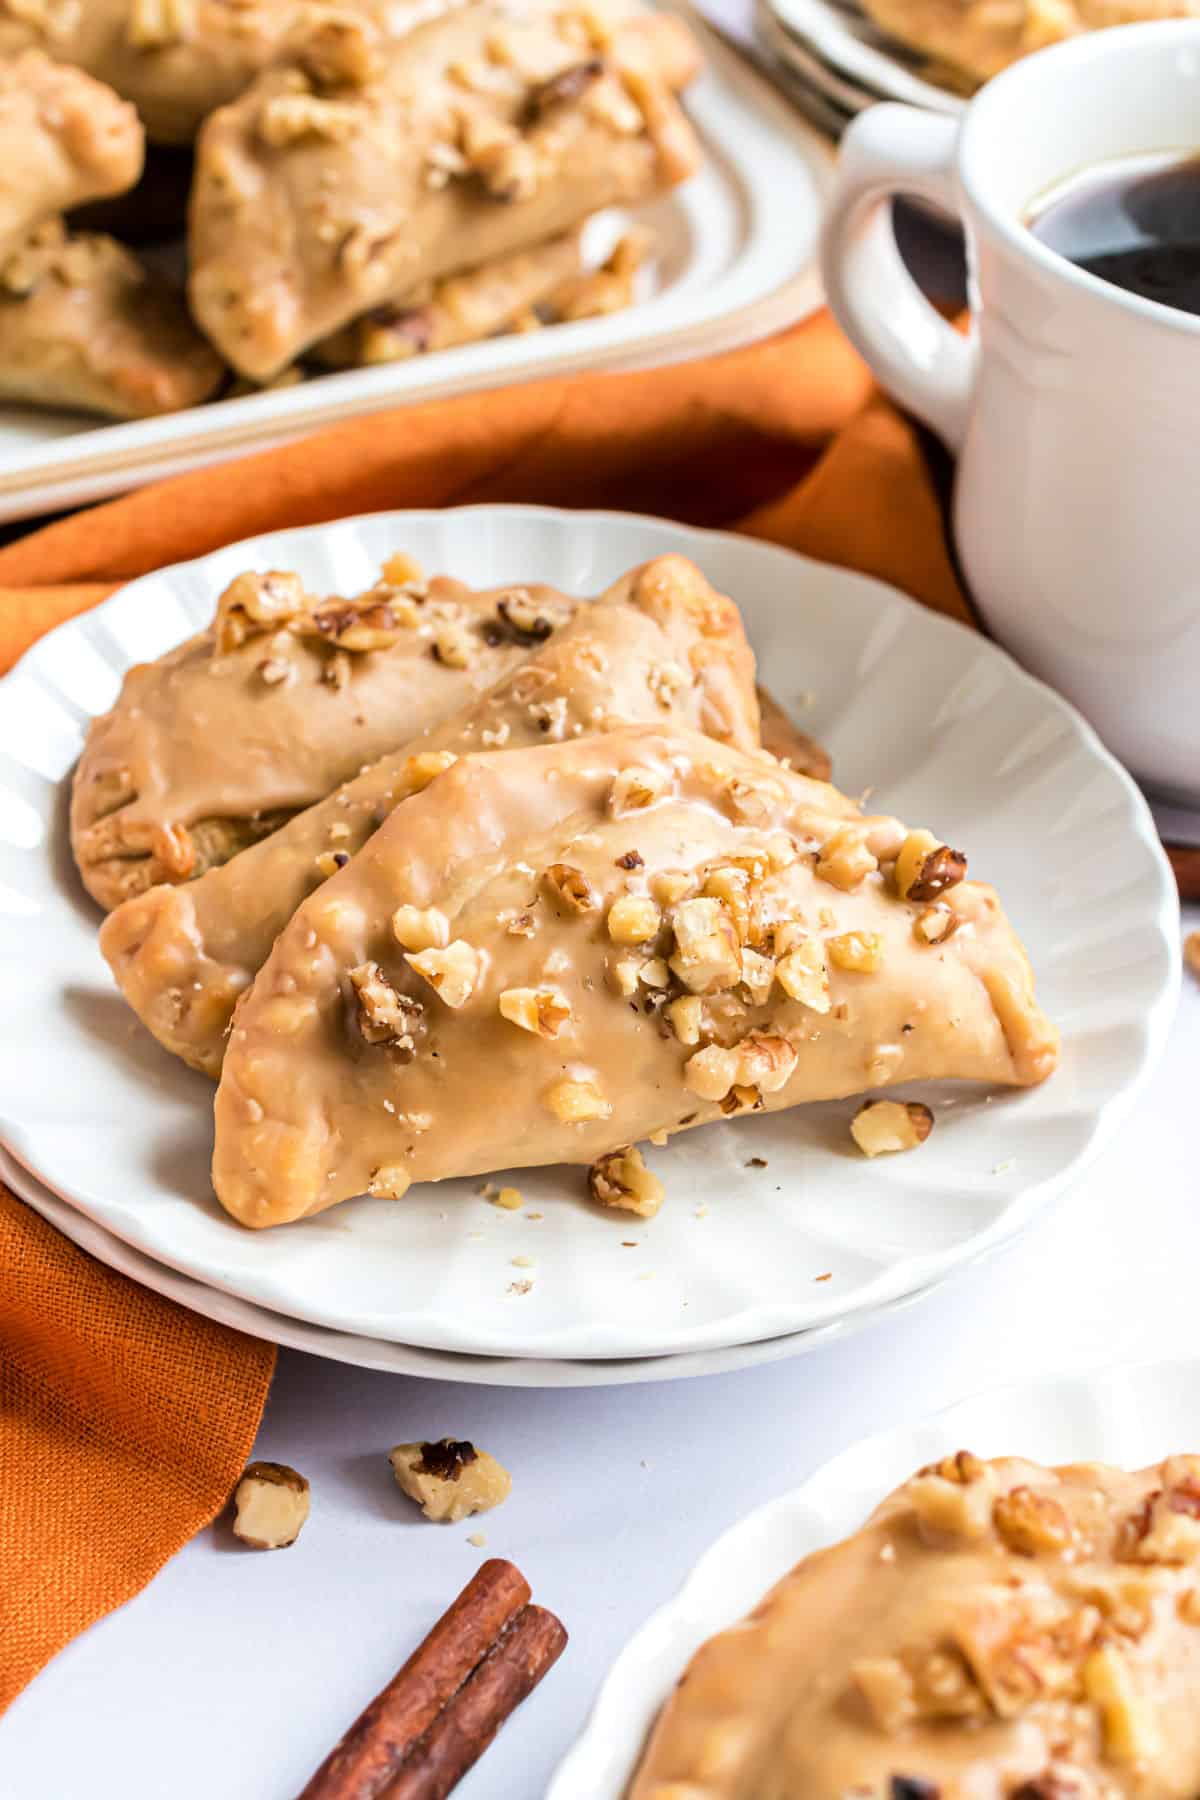 Pumpkin hand pies topped with a glaze and nuts.